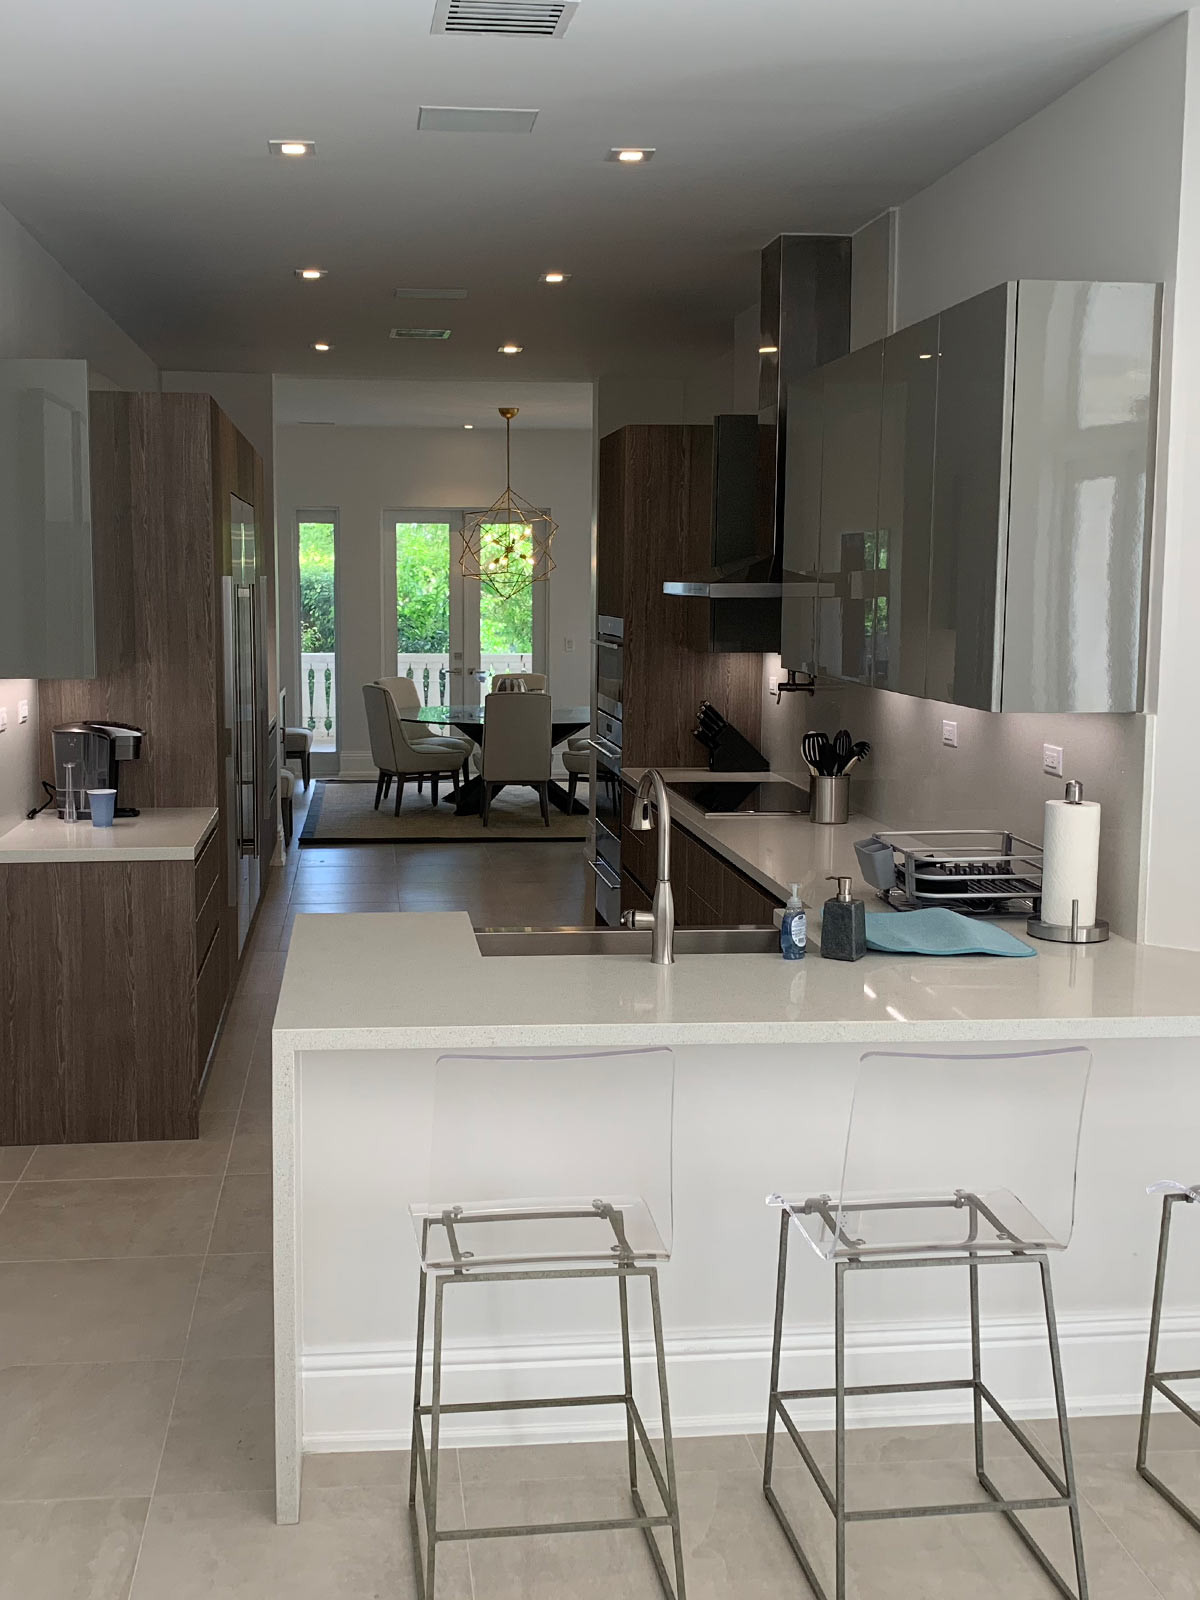 Remodeling Galley Kitchen
 Galley Kitchen Remodel in Coral Gables — Miami General